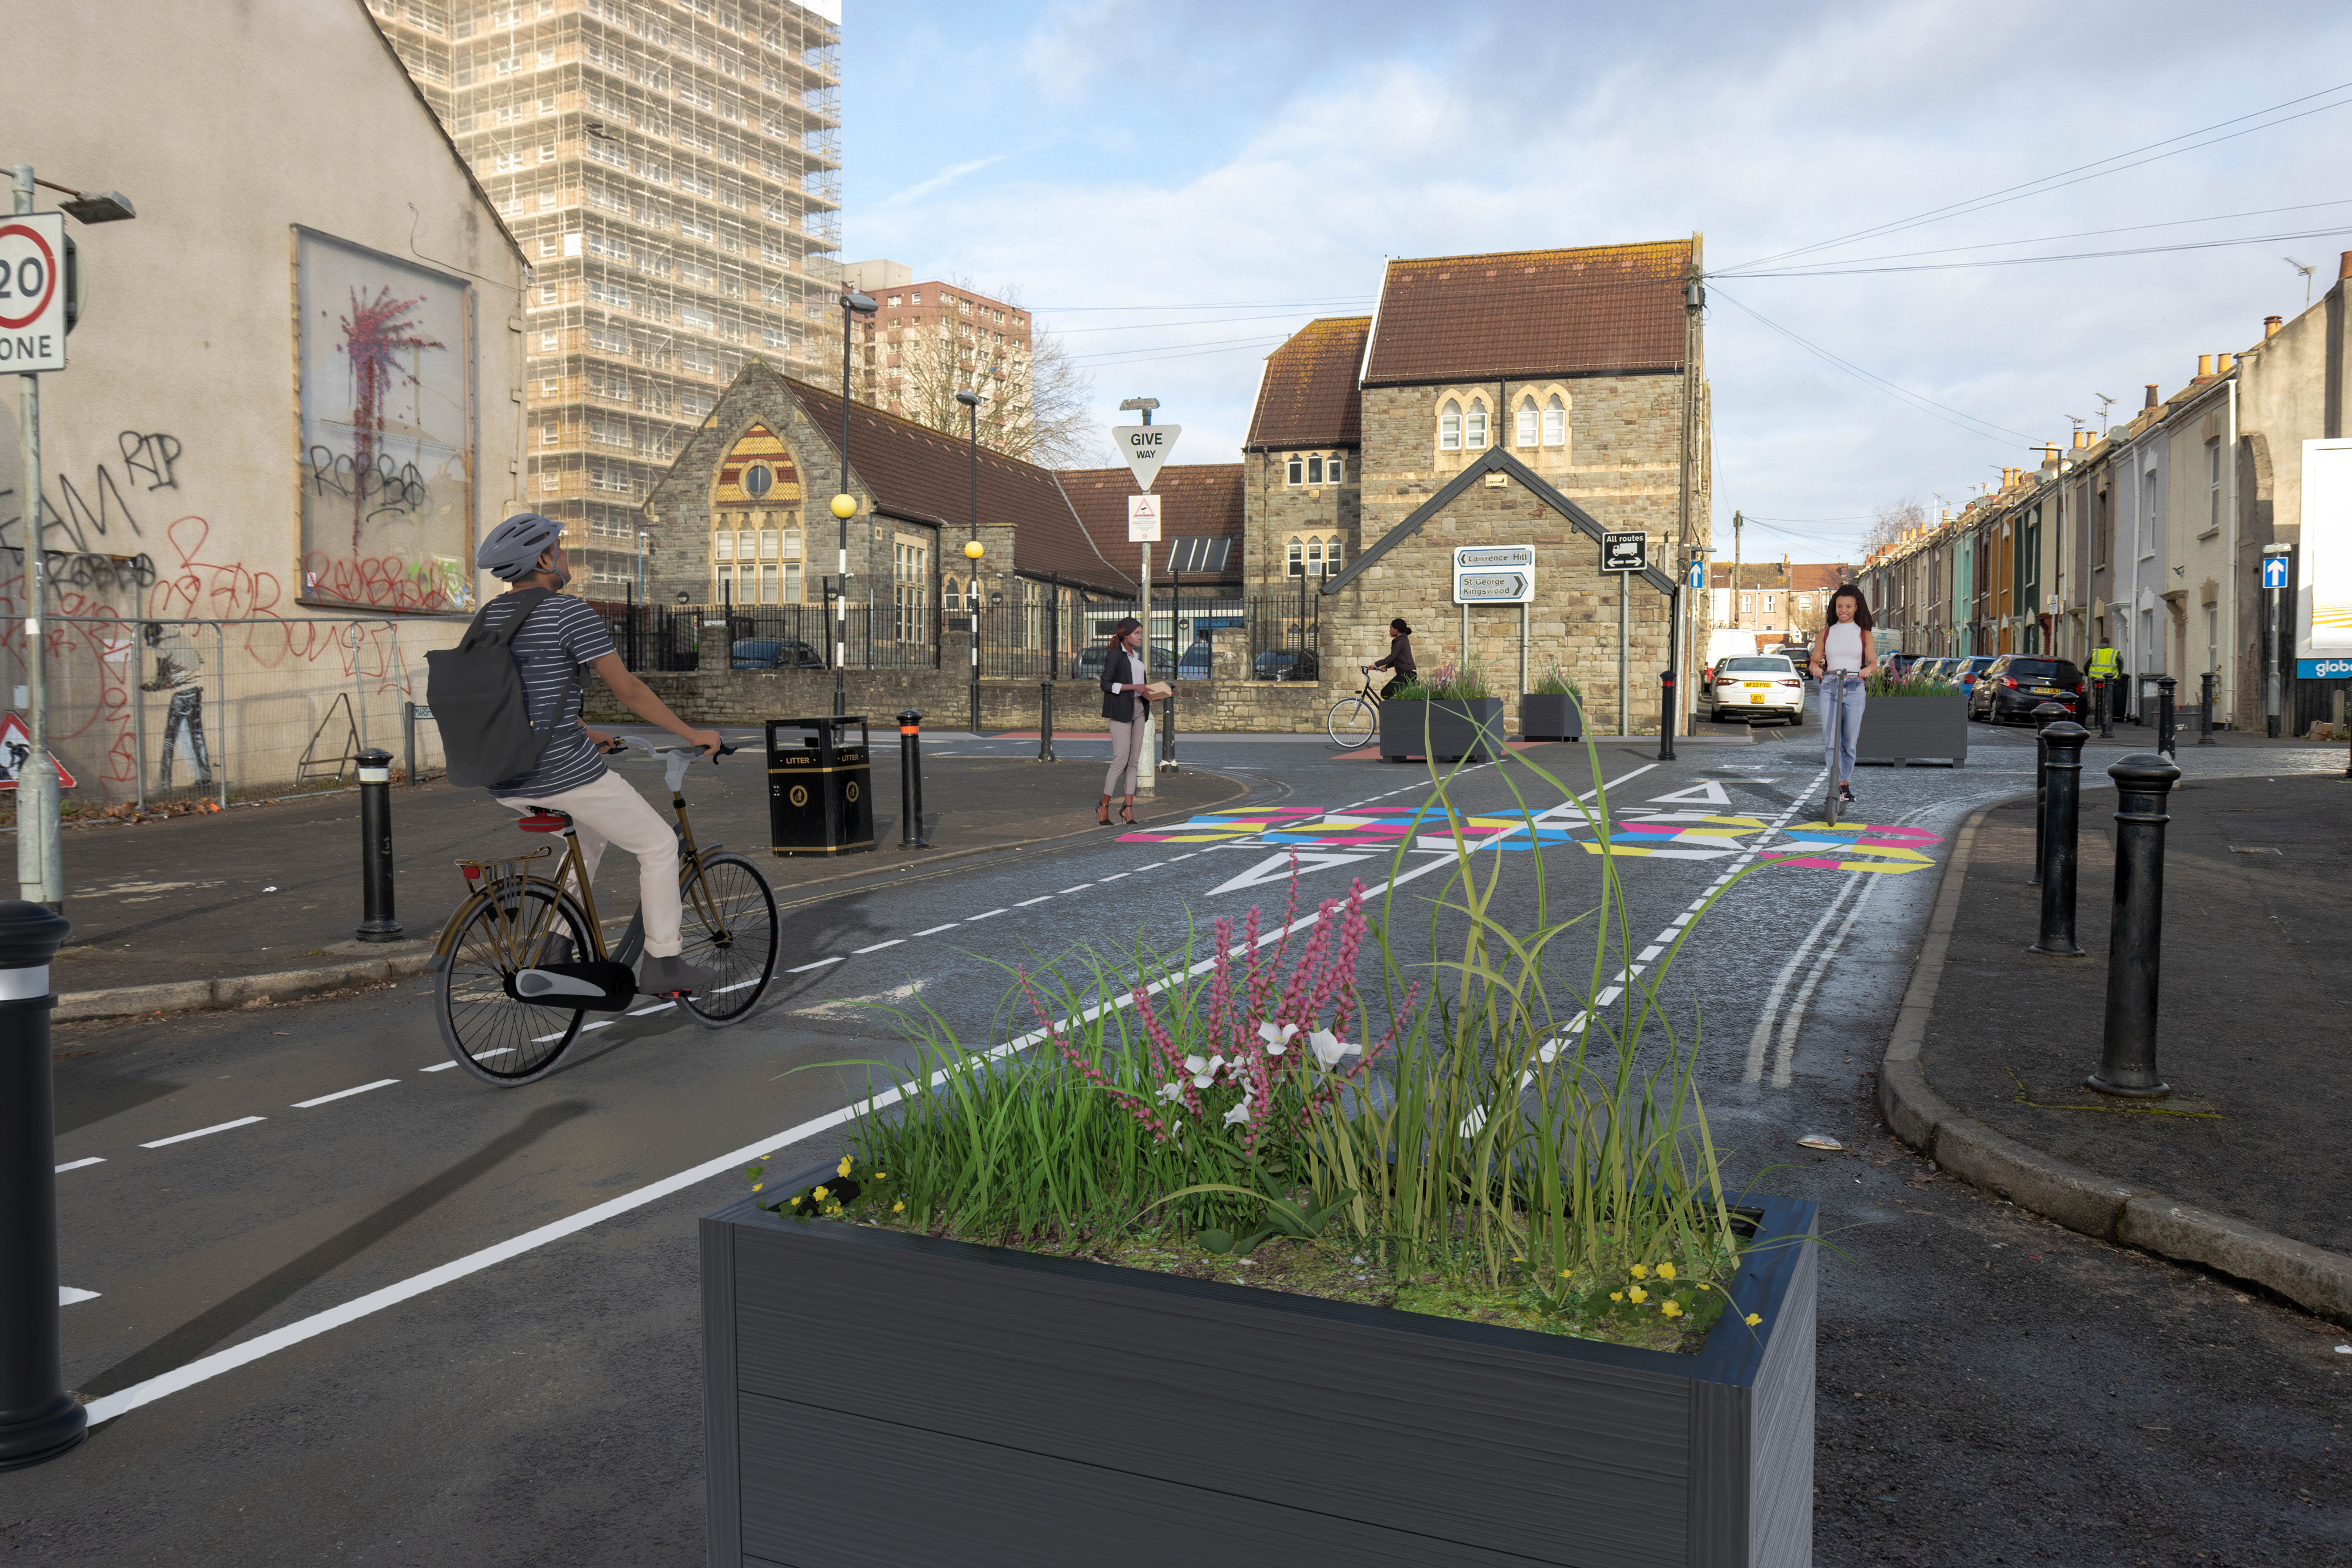 Planters and bollards used to stop vehicles passing through Marsh Lane. Cycle track marked through the middle with pedestrian crossing highlighted in colourful patterns. 